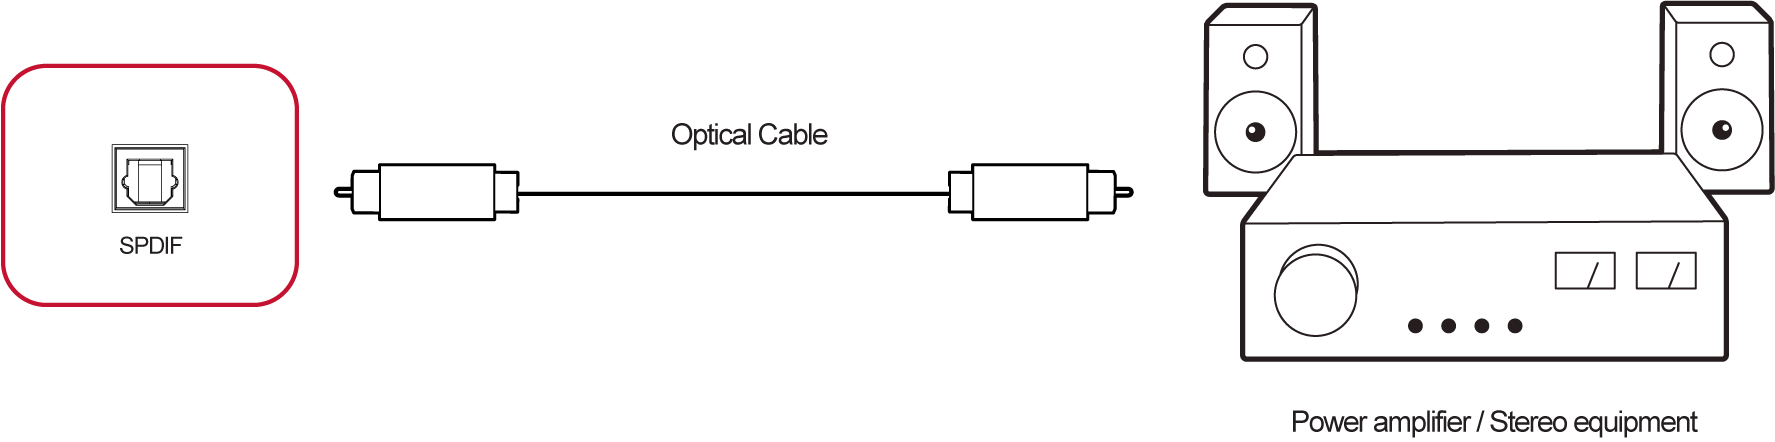 File:IFP50-3 SPDIF Connection.png